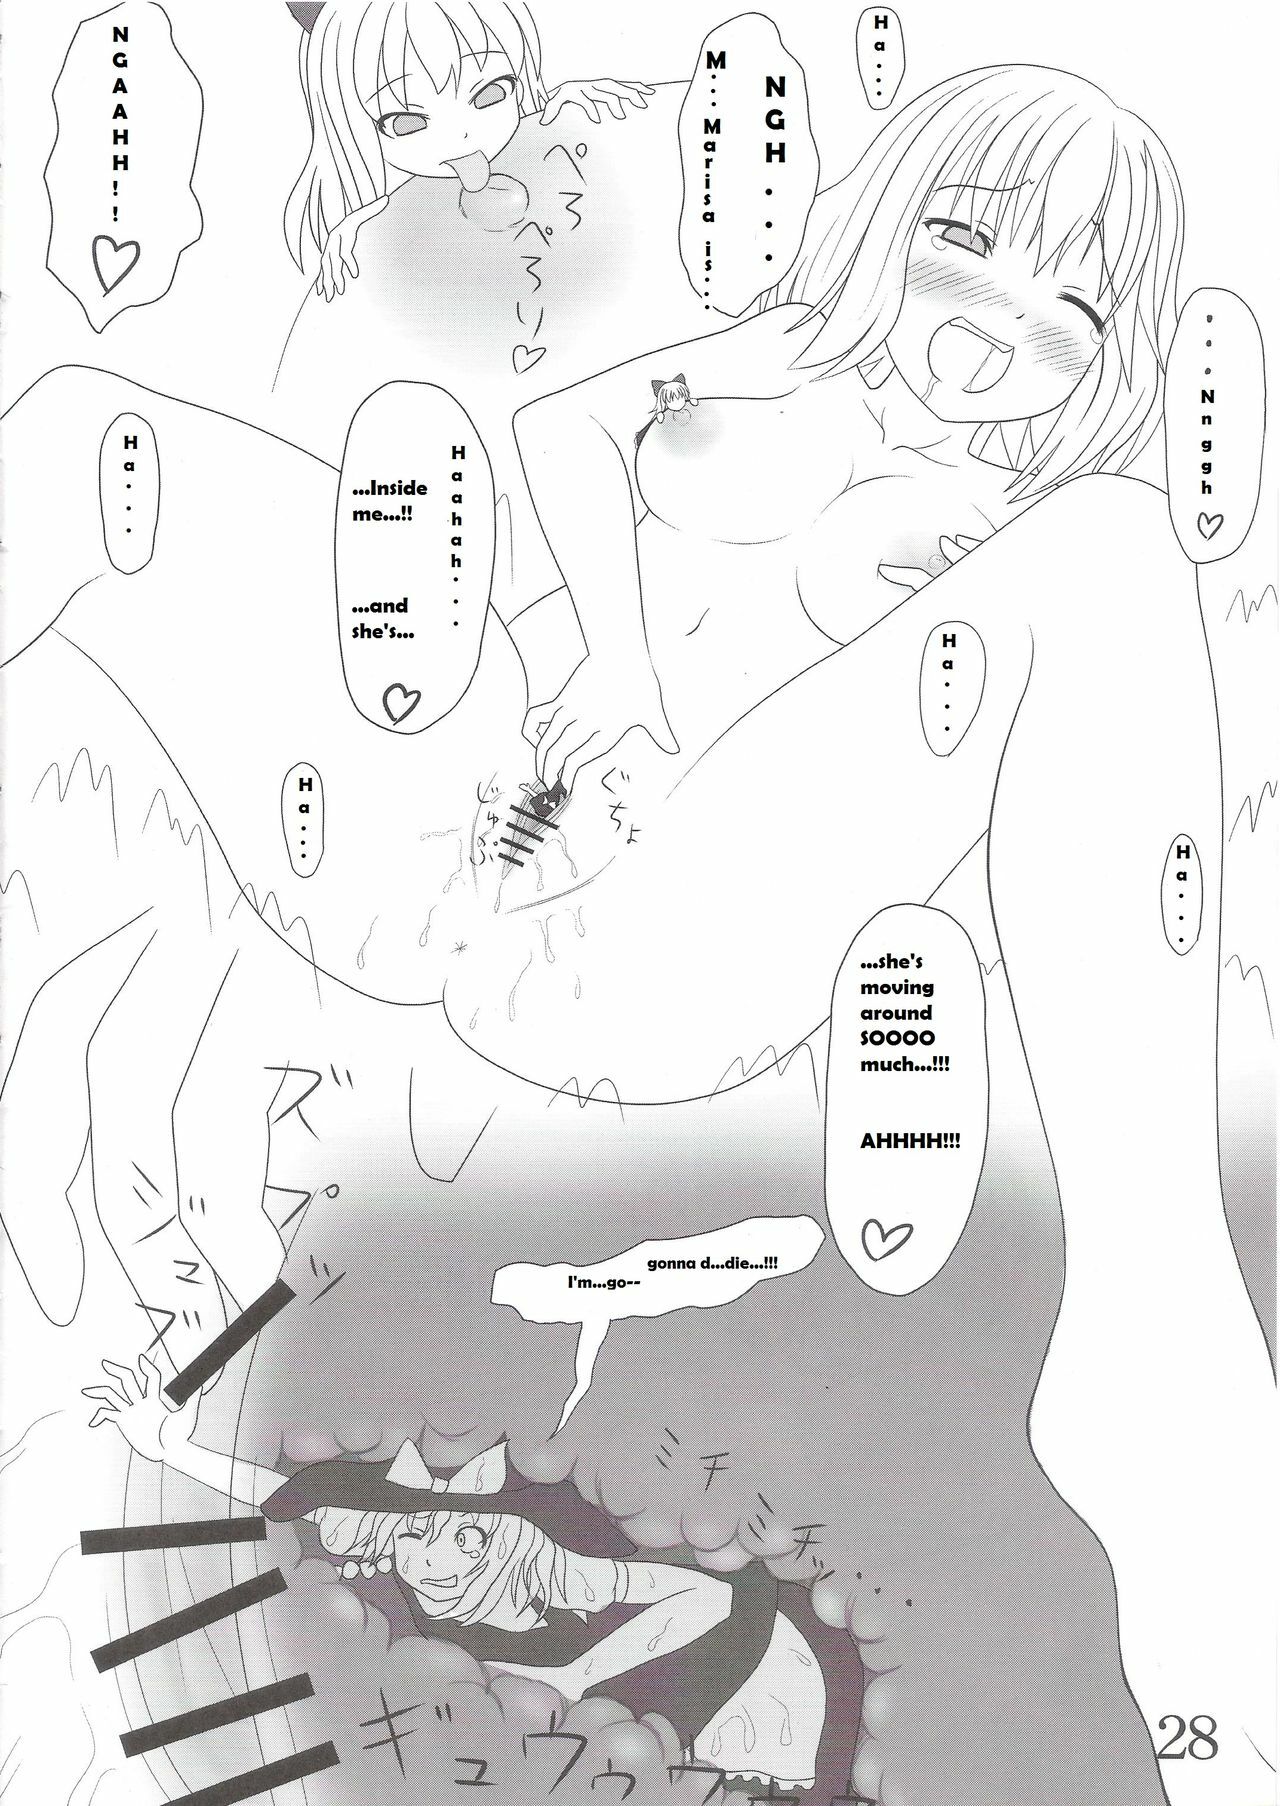 Touhou Super Dreadnaught (Magical) Girl English page 28 full